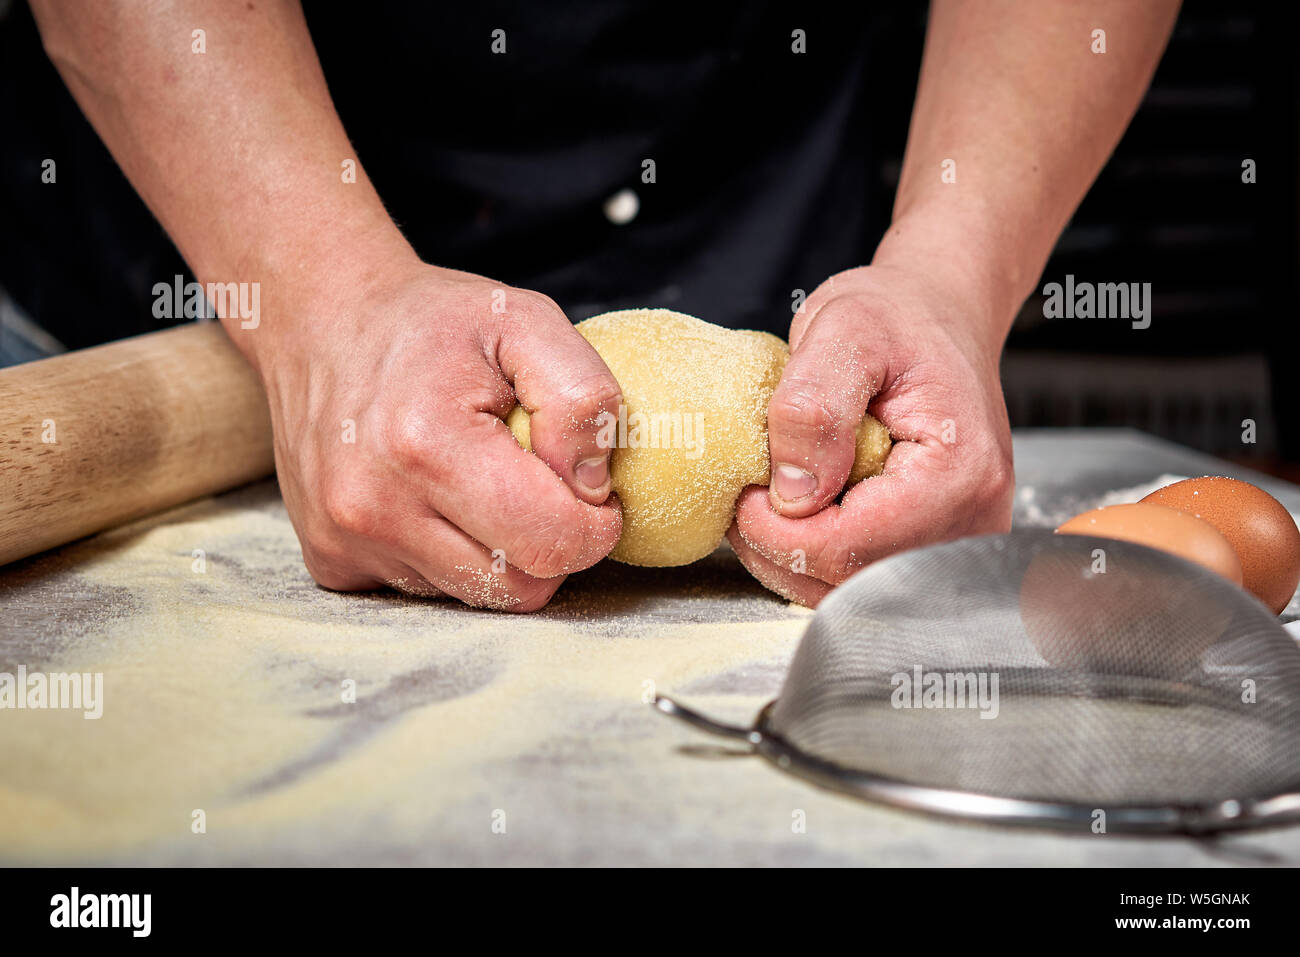 Pin on knead to get